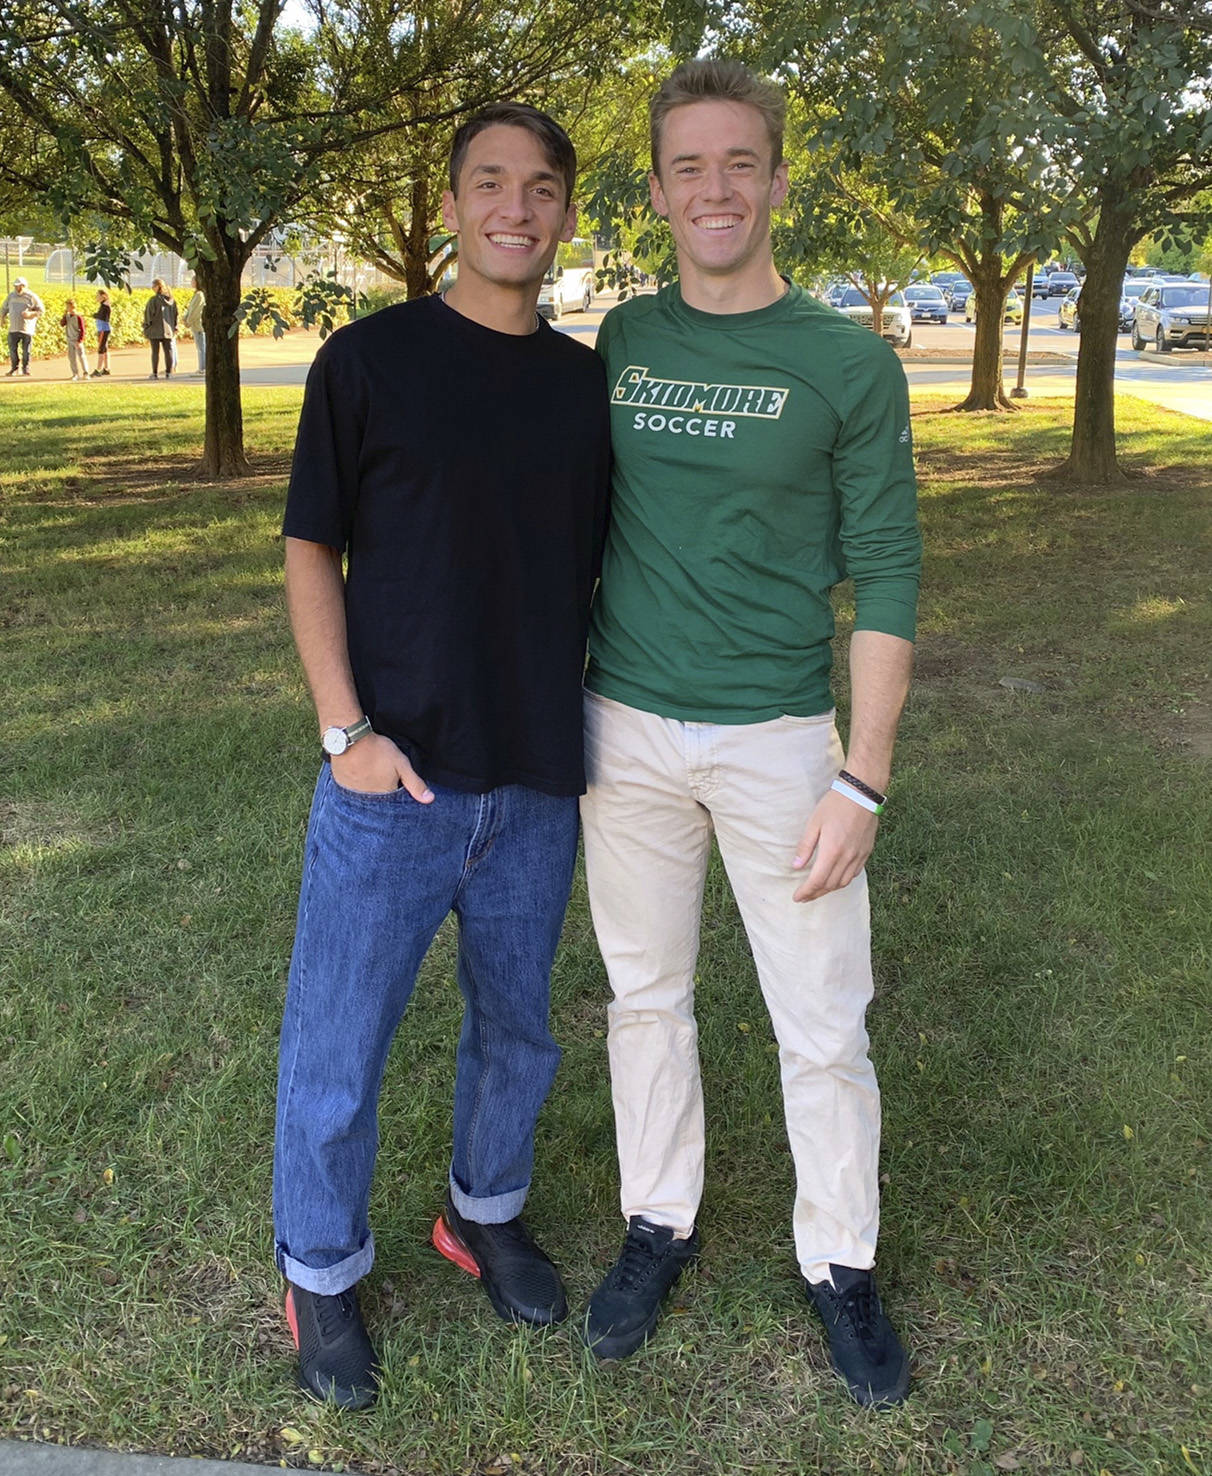 Reis Kissel (left), a defender for Vassar College, and David Braman (right), a midfielder for Skidmore College, have trained together during the summer the last two years to prepare for their college soccer seasons. Photo courtesy of Pat Braman